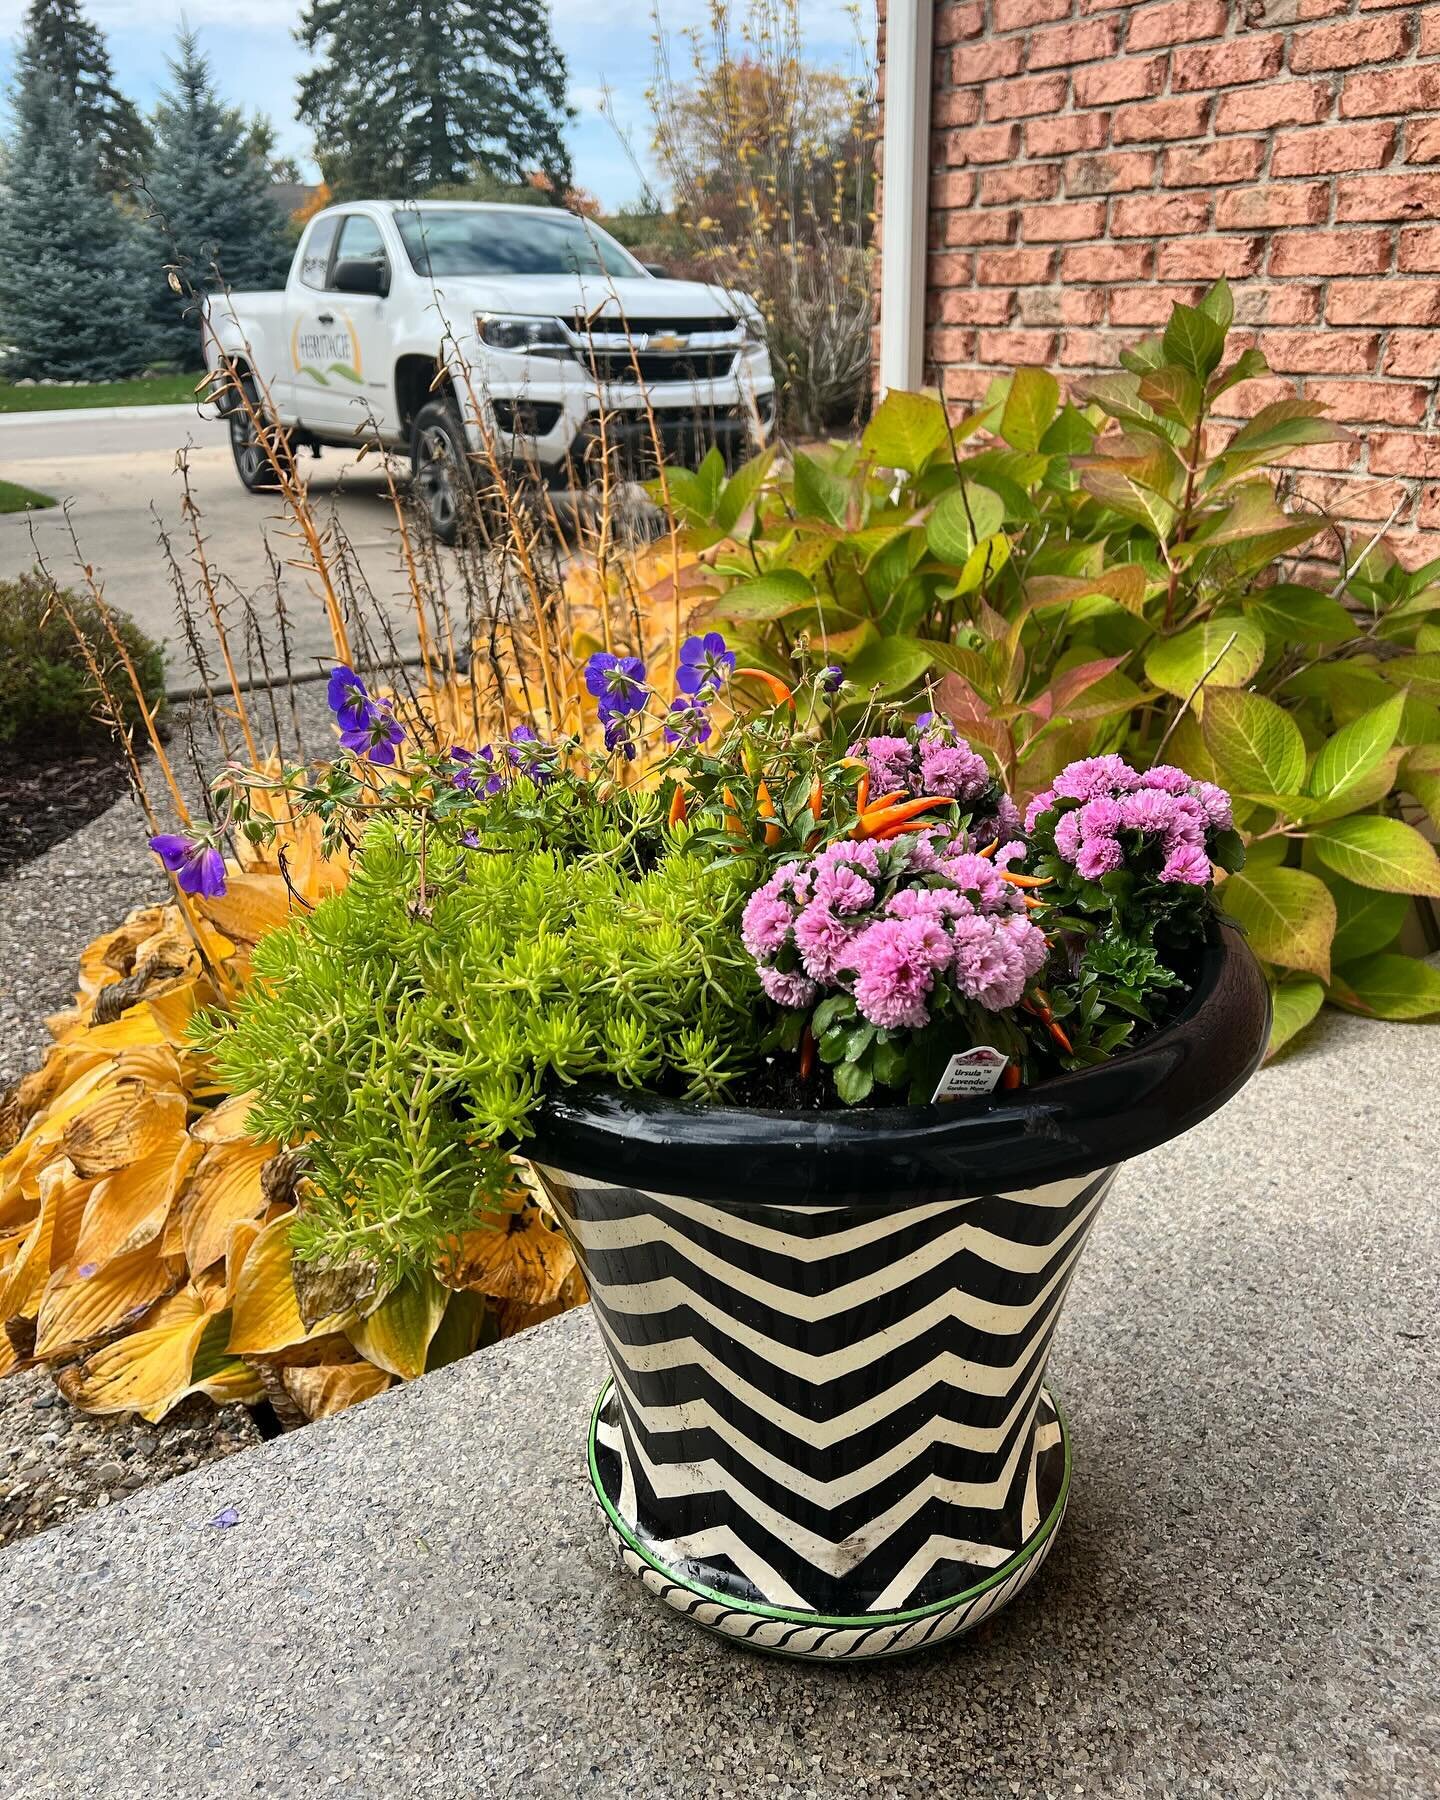 Never too late in the season 🍂  @yopatches &hellip; &hellip; &hellip; &hellip;  #landscaping #landscapephotography #flowers #flowerpower #flowerpots #horticulturist #horticulture #localbusiness #annarbor #annarborflowers